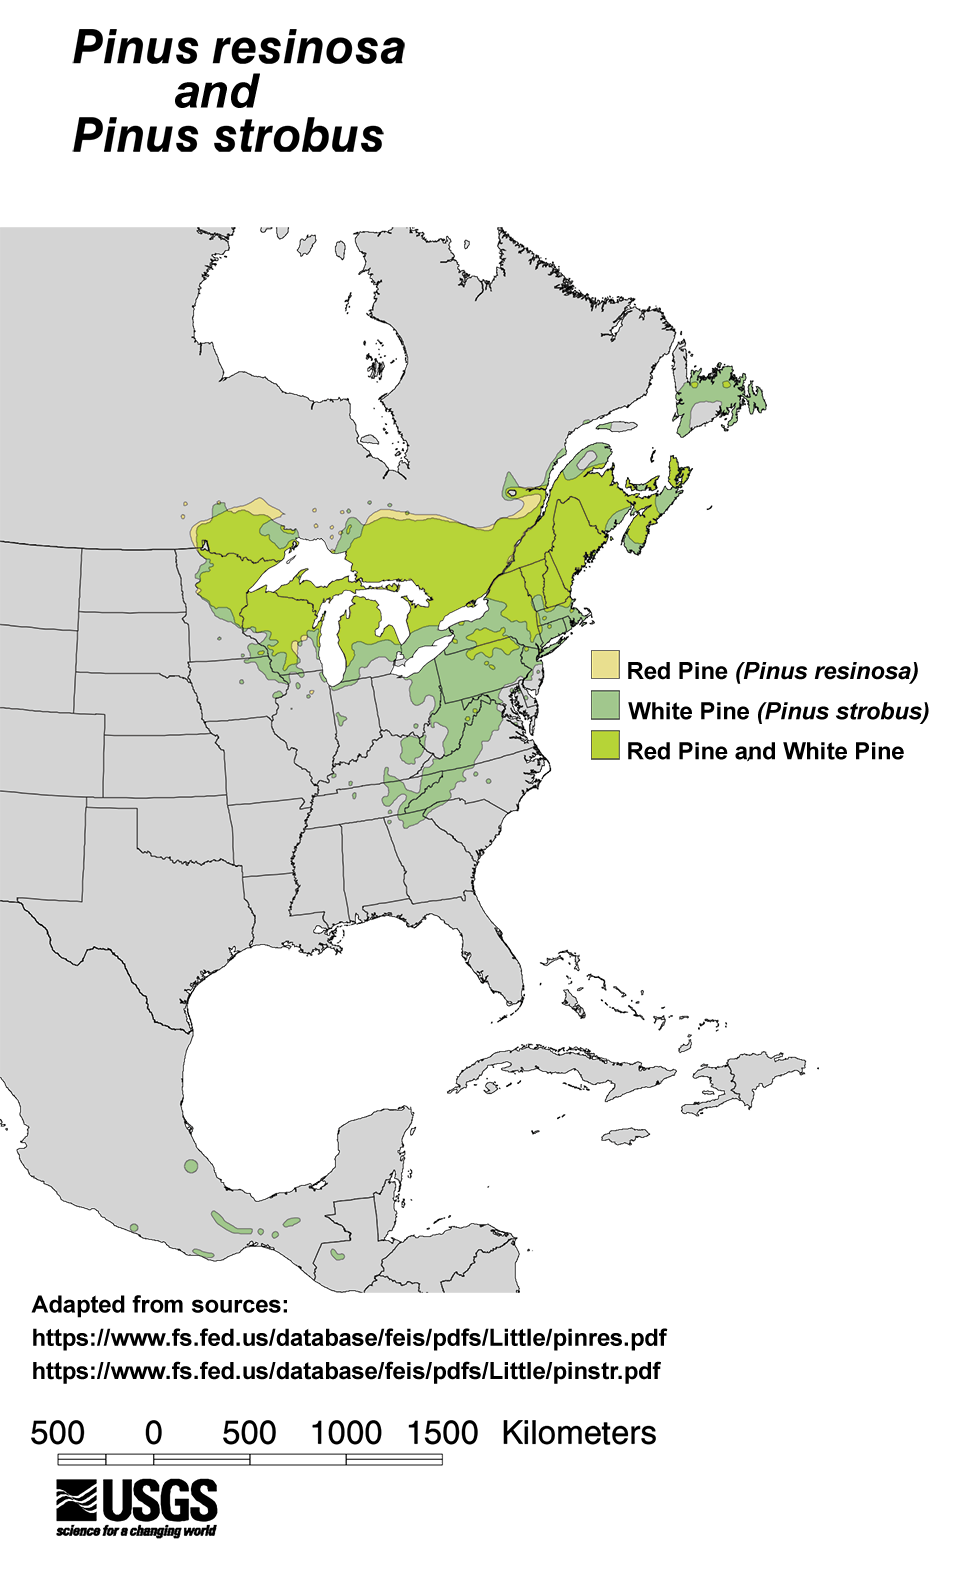 Distribution map of red pine and white pine in mostly the north and eastern portions of the United States and into Canada. Scattered instances in the South and Mexico.